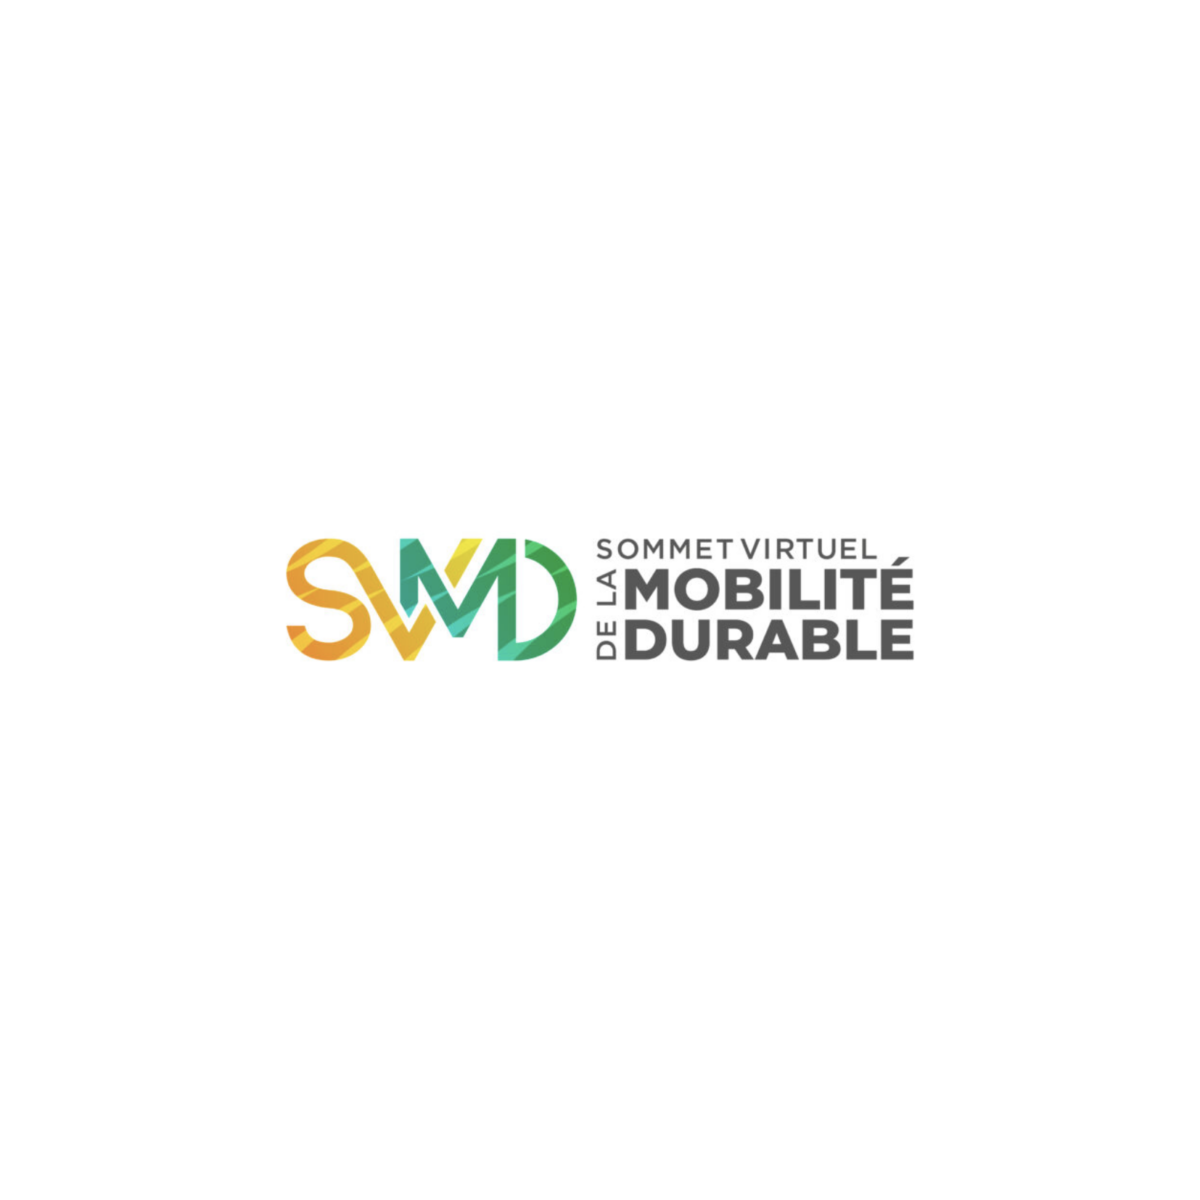 Sustainable Mobility Virtual Summit